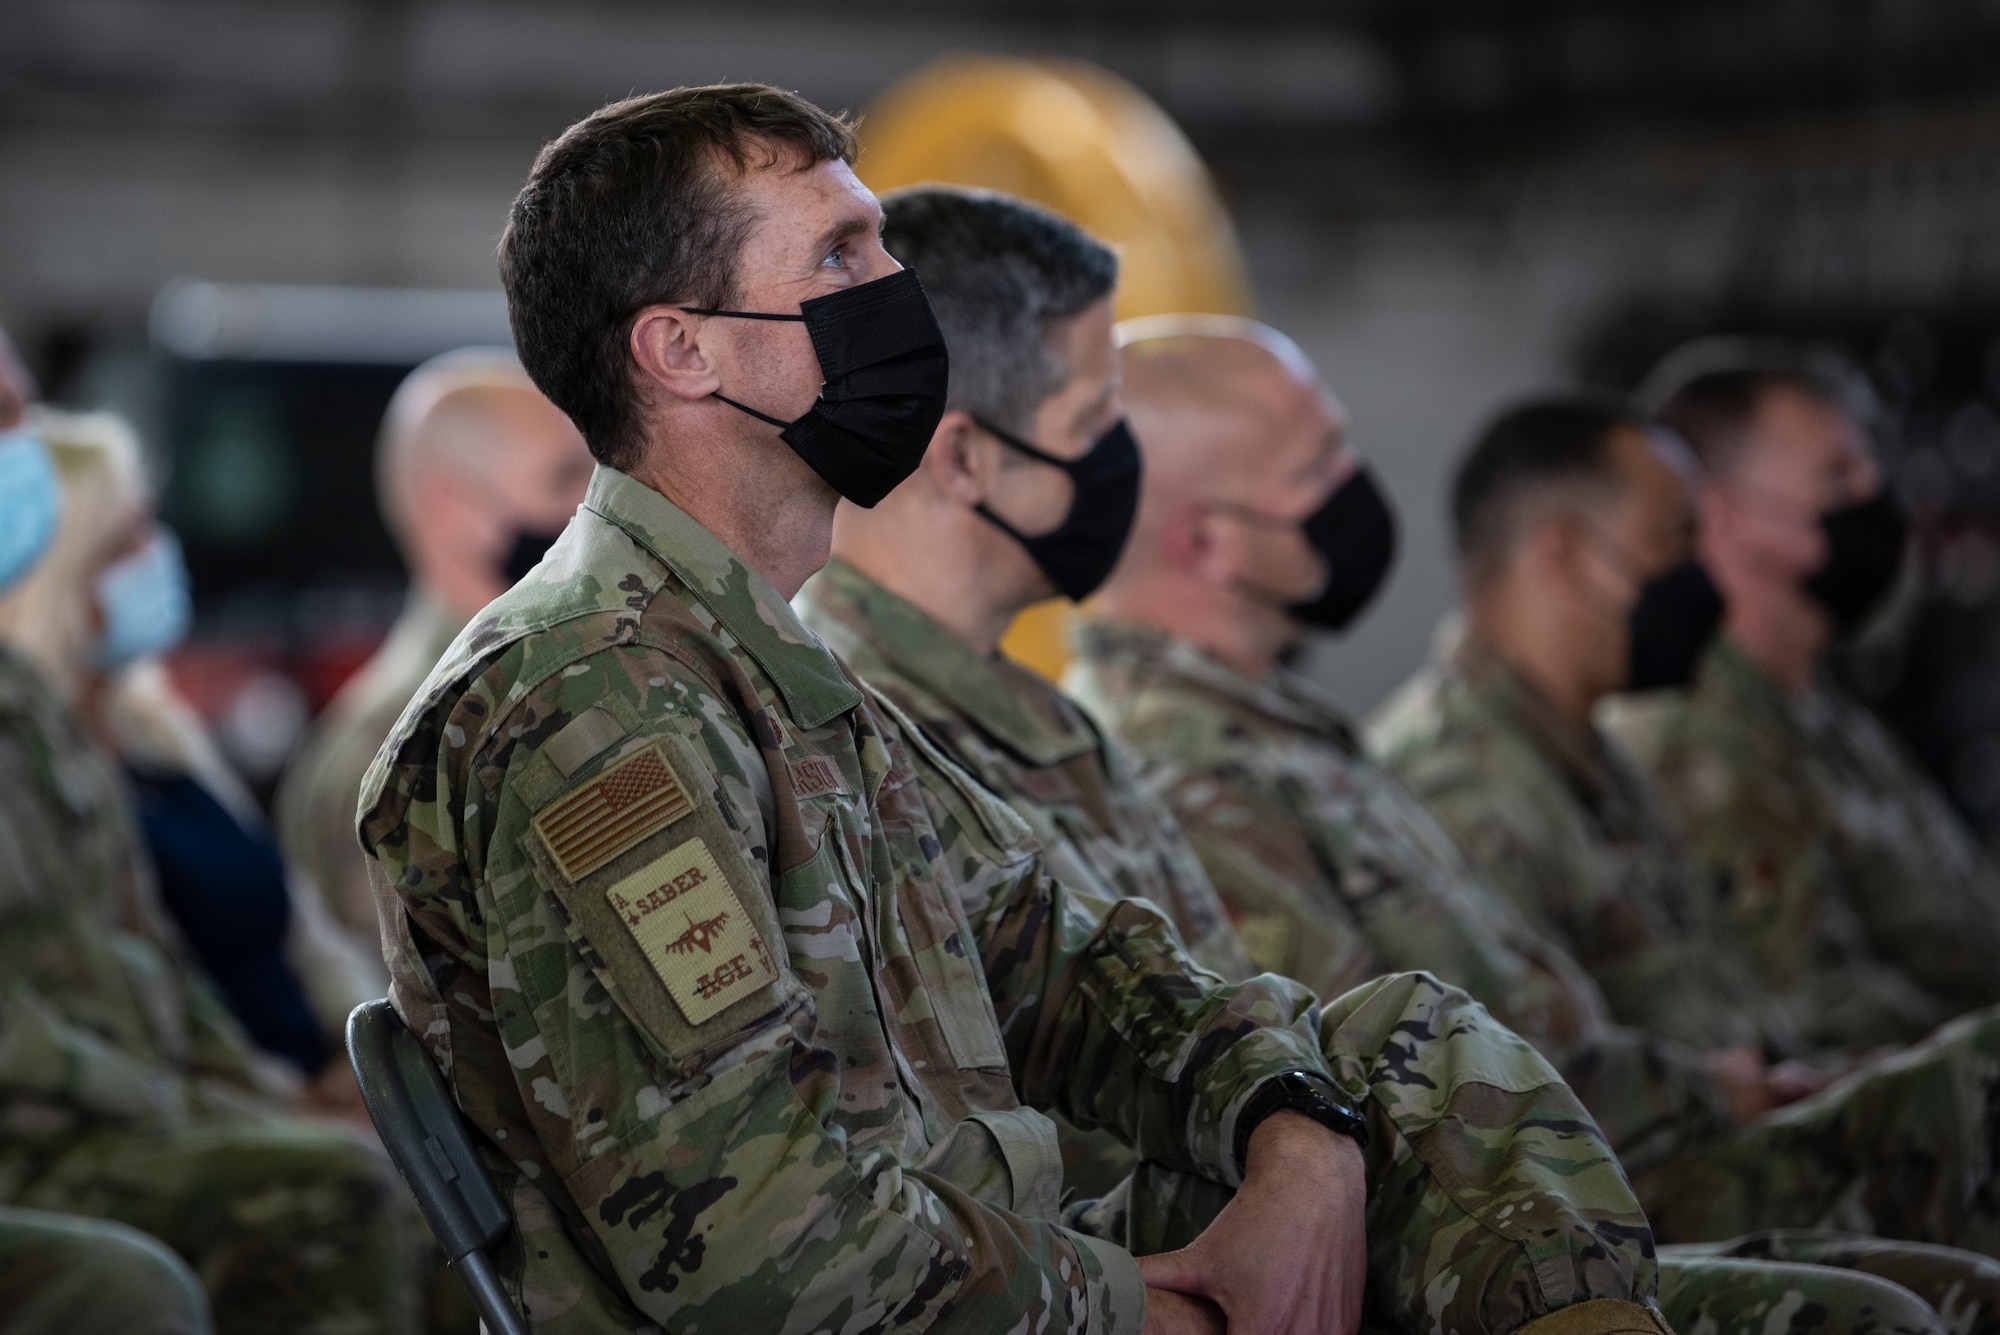 U.S. Air Force Col. David Epperson, 52nd Fighter Wing commander, and other audience members listen to a speech during the 52nd Aircraft Maintenance Squadron assumption of command, July 6, 2021, on Spangdahlem Air Base, Germany. Assumptions of command ceremonies consist of passing a guidon to the incoming commander, then following with the incoming commander giving their first salute and taking command of the squadron. (U.S. Air Forces photo by Staff Sgt. Melody W. Howley)